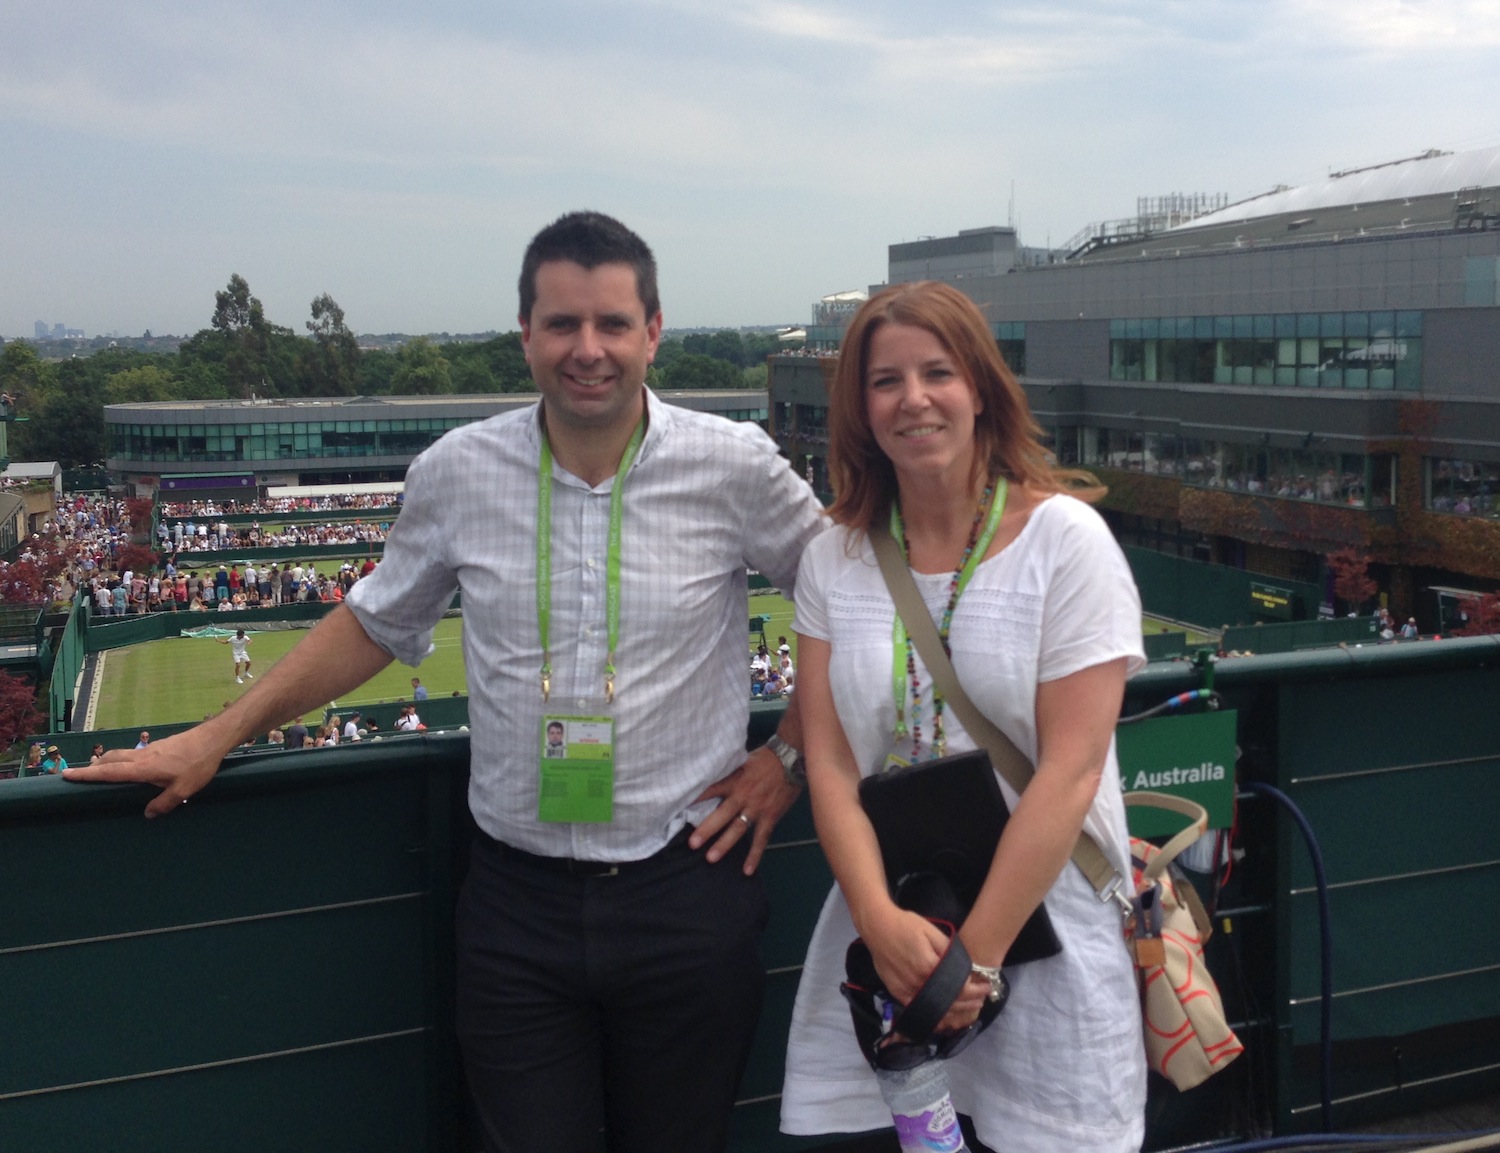 Live from Wimbledon 2015 ACS customised camera supply to tournament increases four-fold